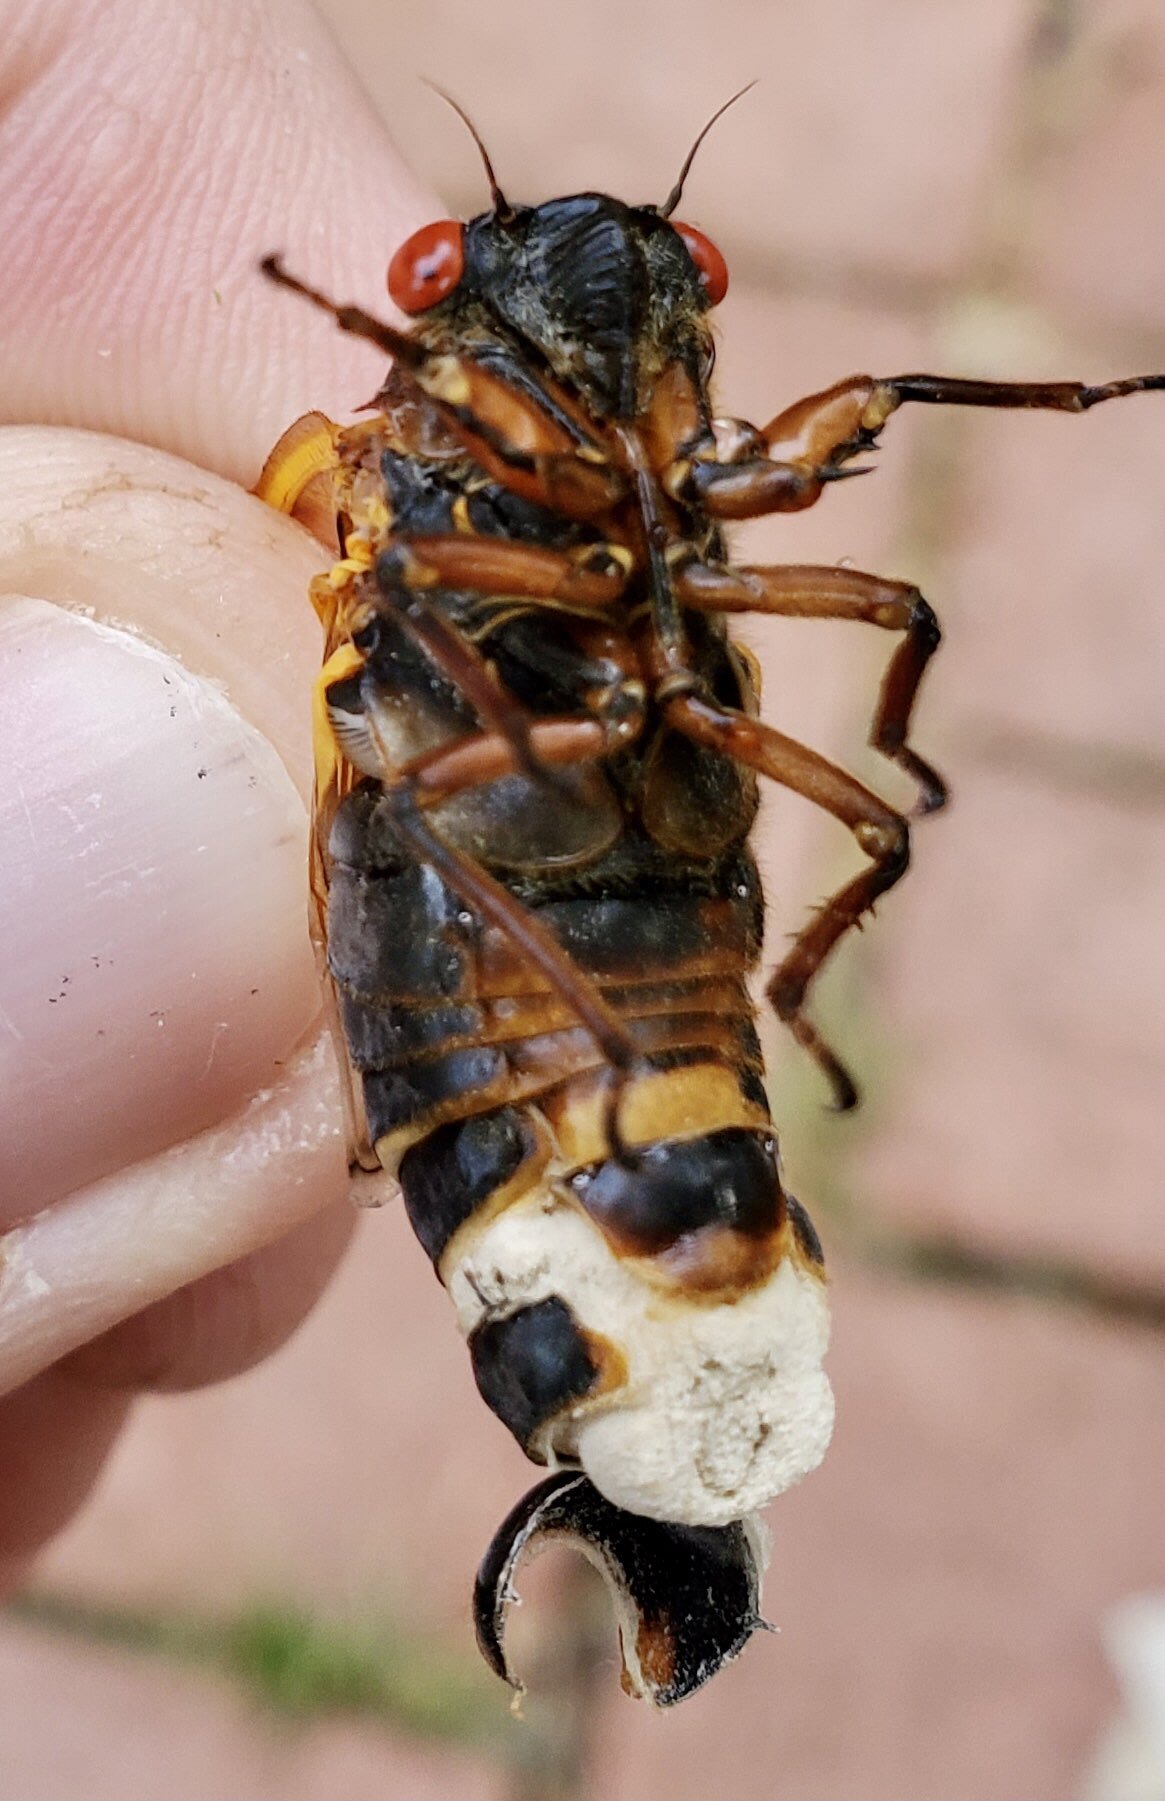 an infected cicada with a chalky white fungal plug on its abdomen